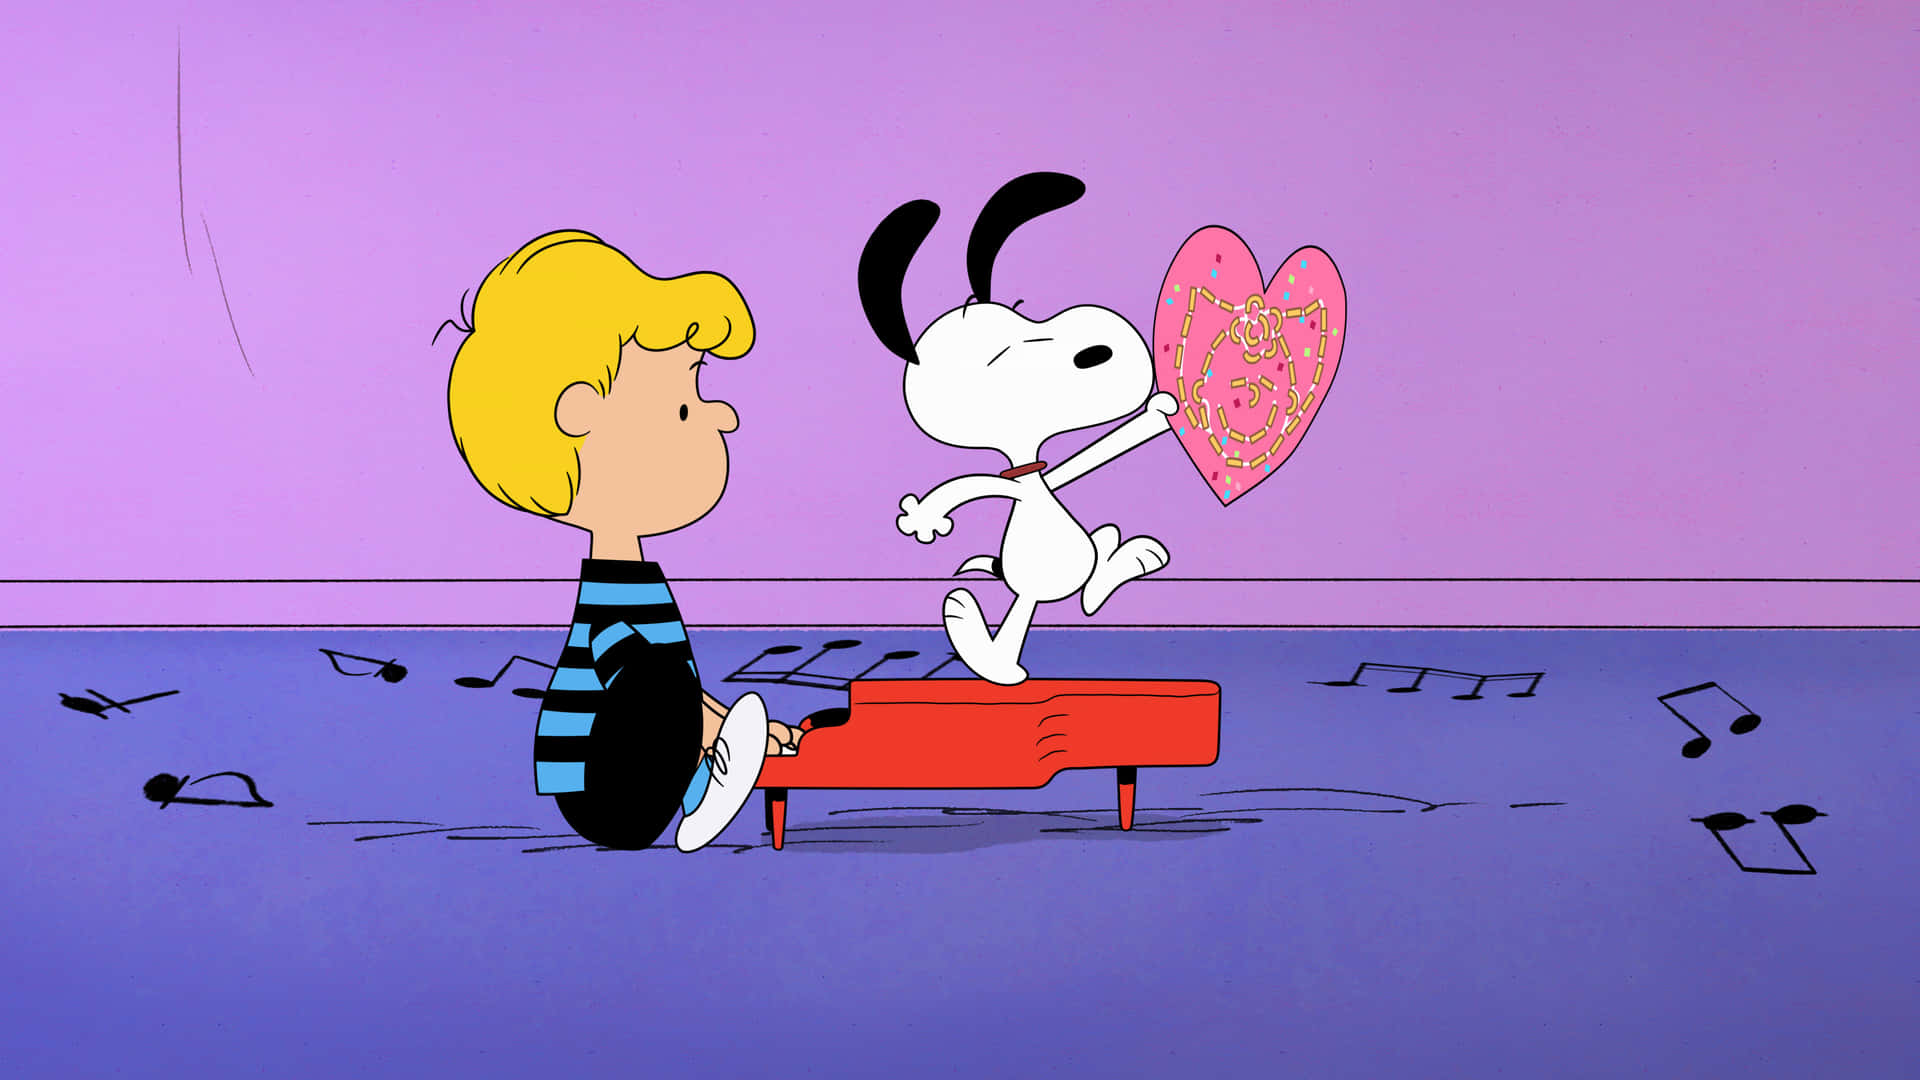 Snoopy the beloved dog from comic strip Peanuts by Charles Schulz.